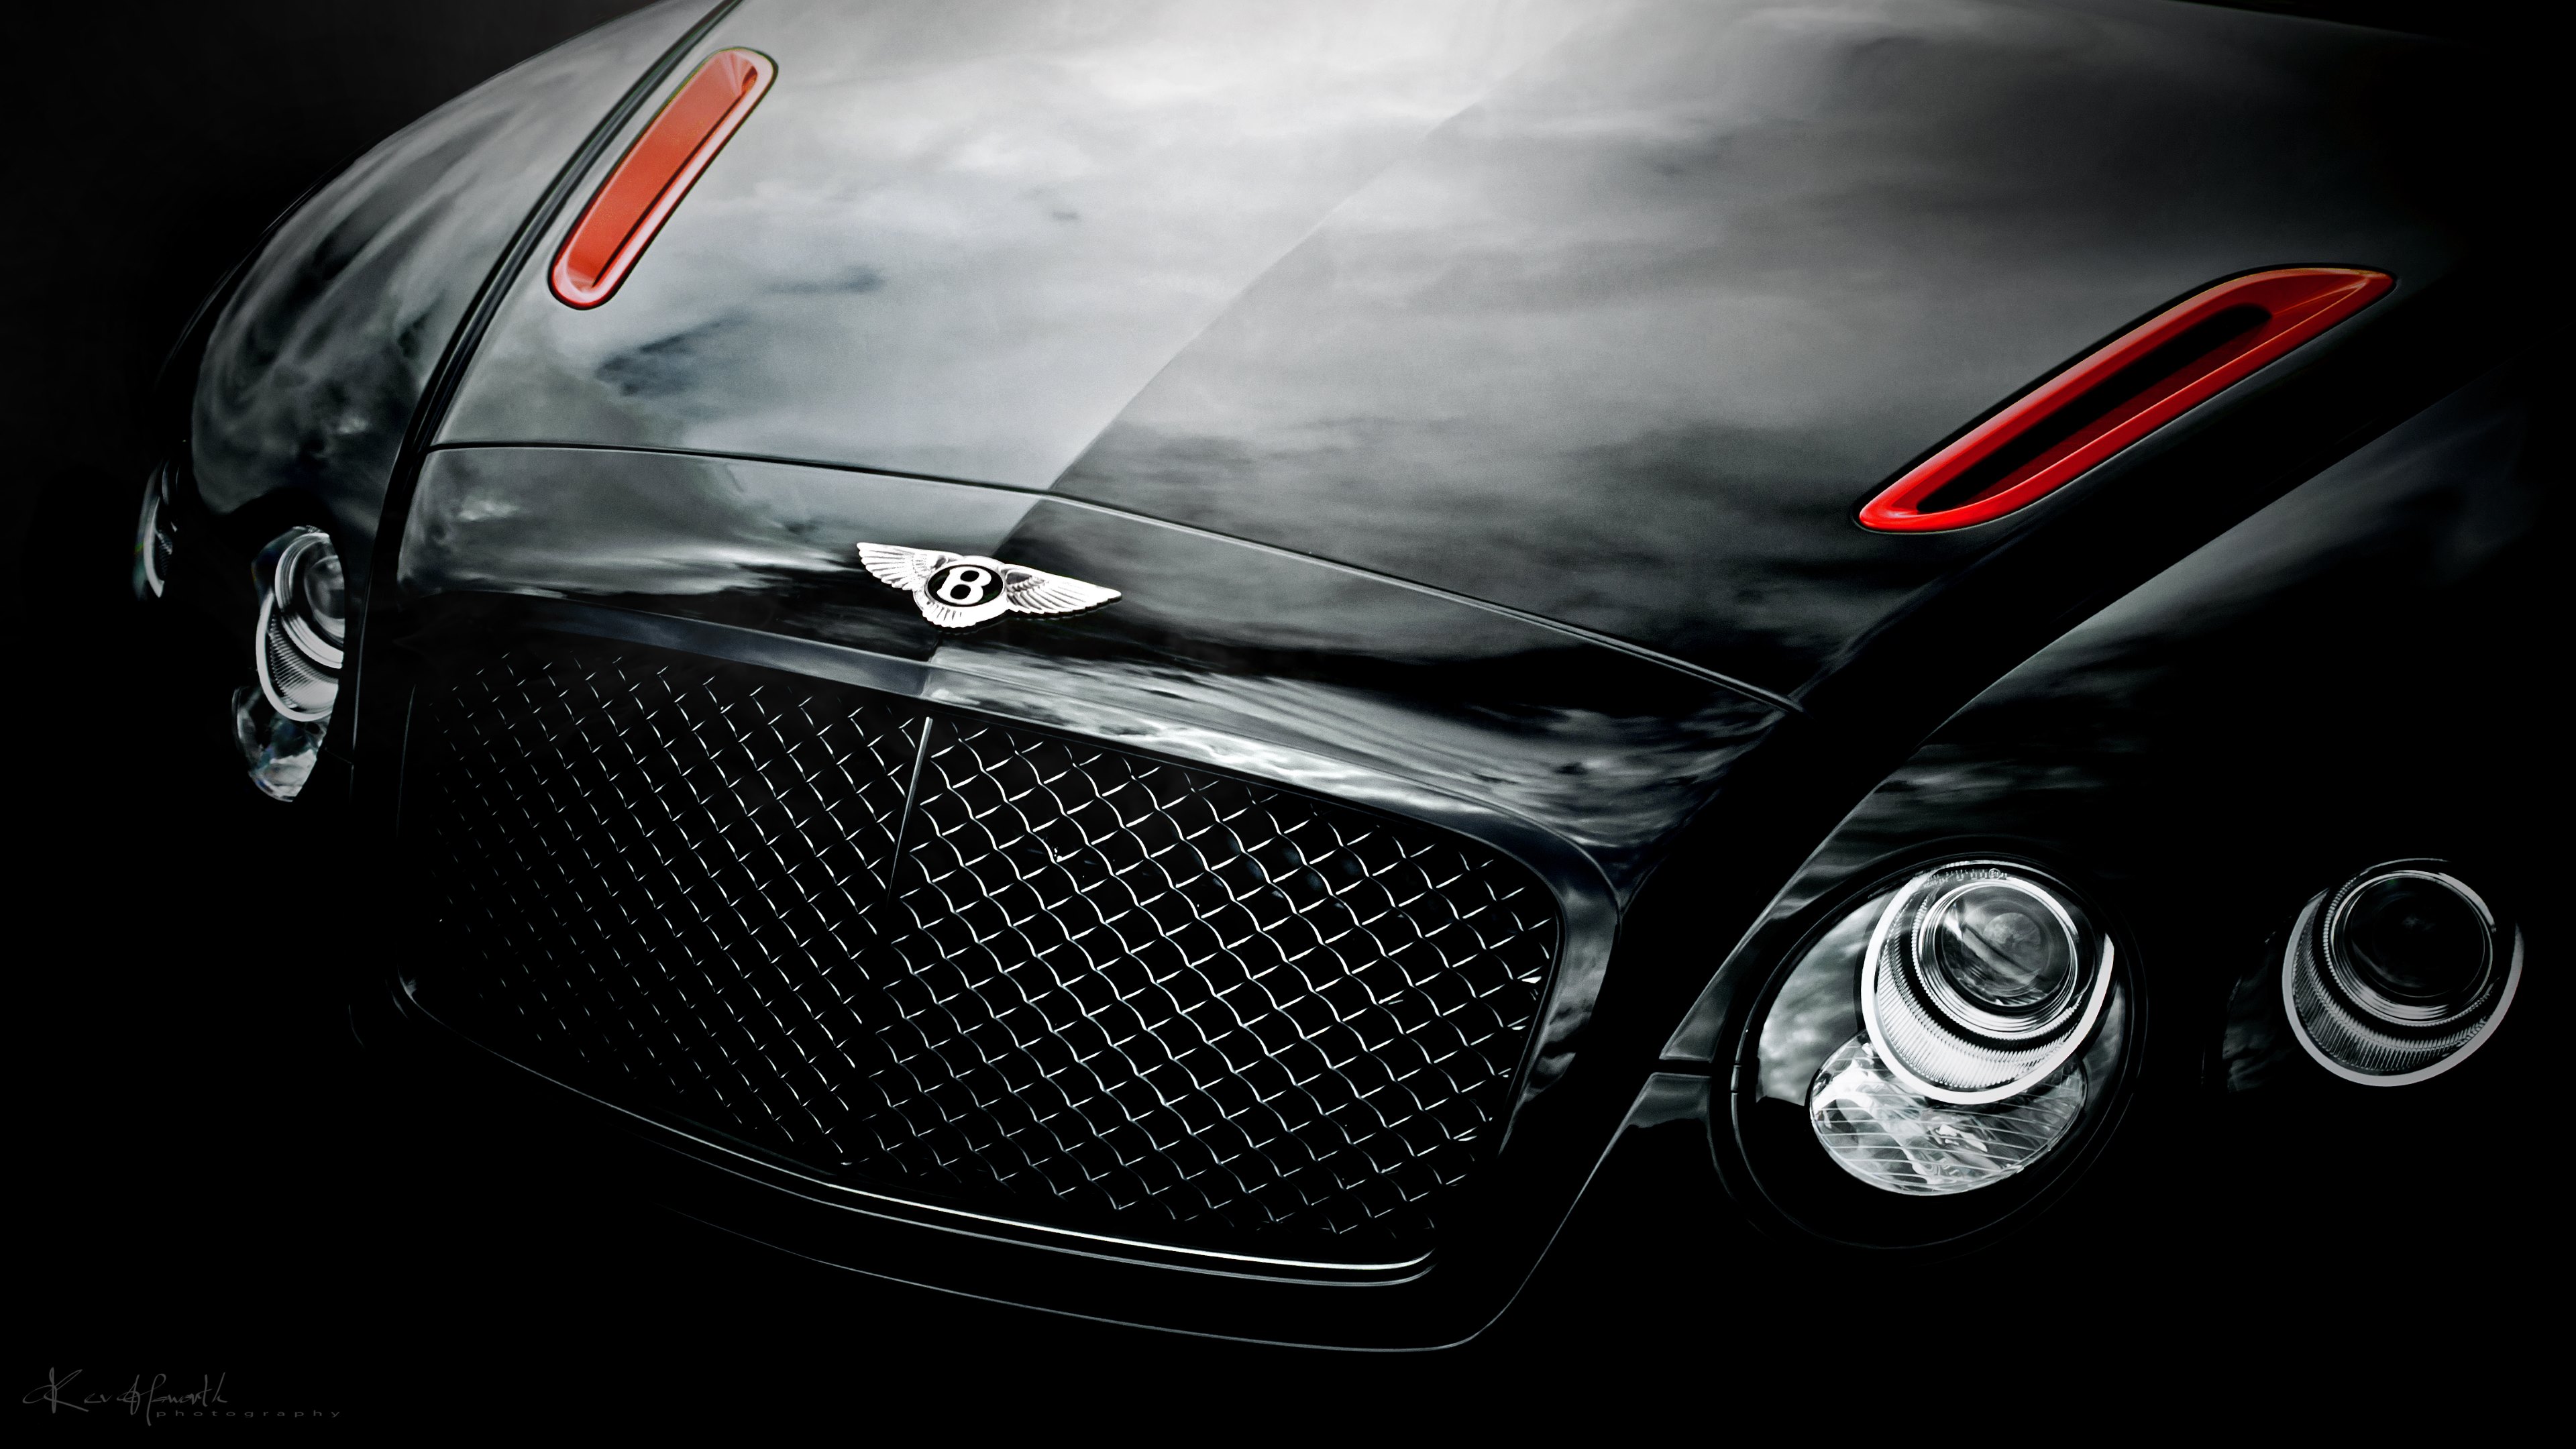 180+ Bentley Continental GT HD Wallpapers and Backgrounds